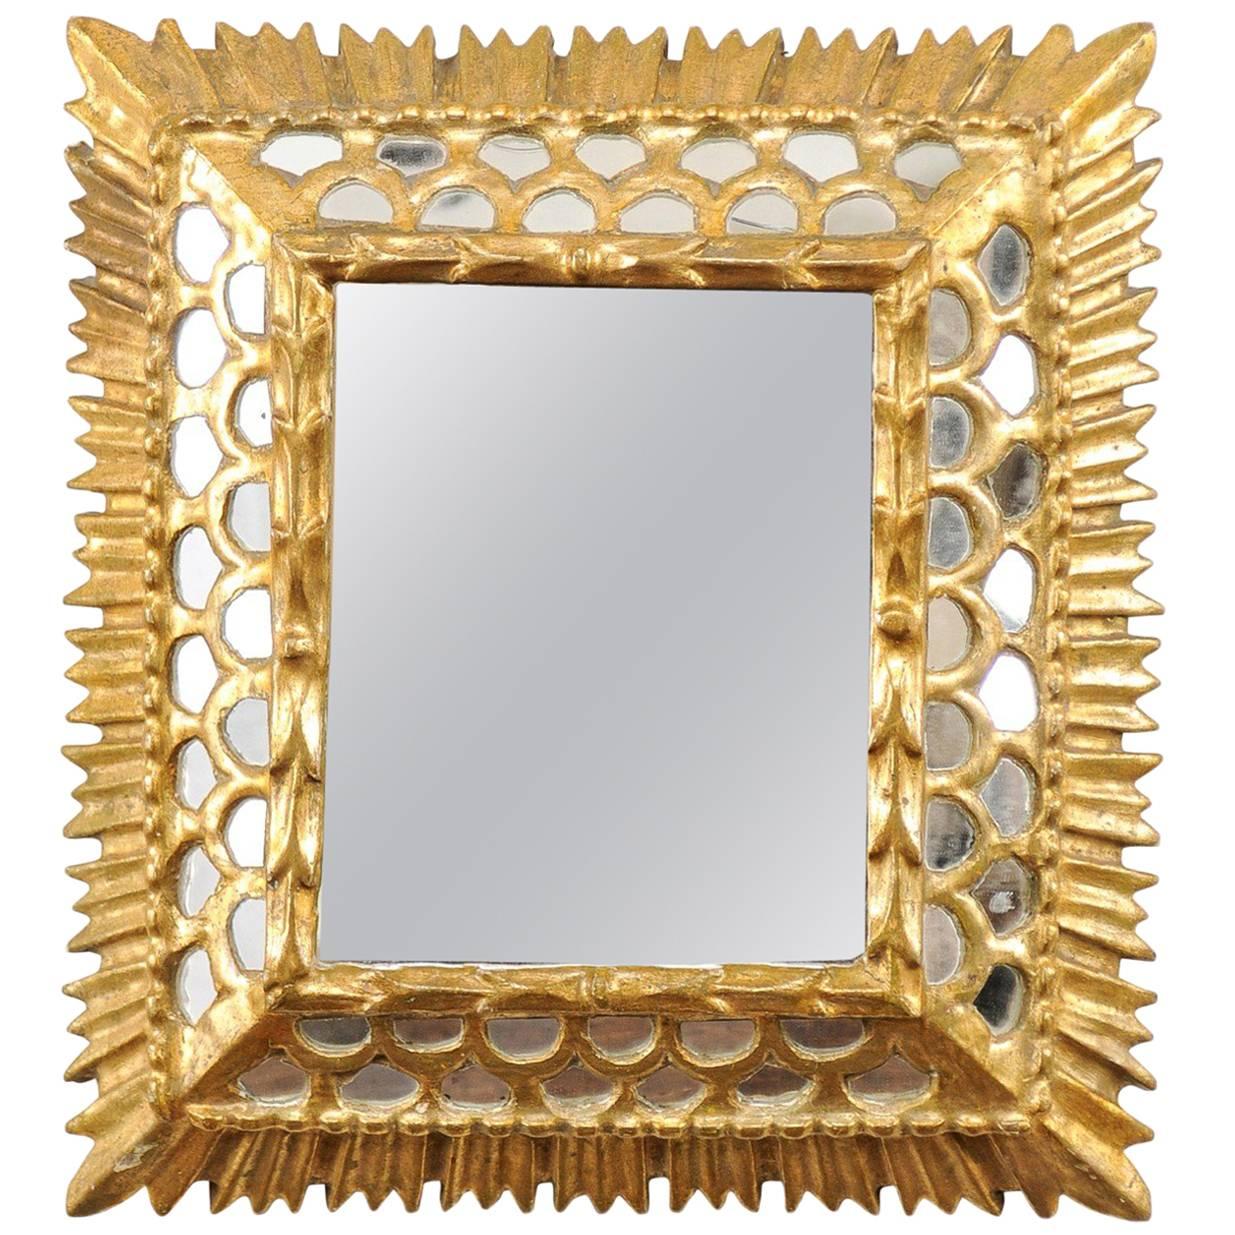 Small European Gilded Mirror with Raised Centre and Honeycomb Pattern Surround